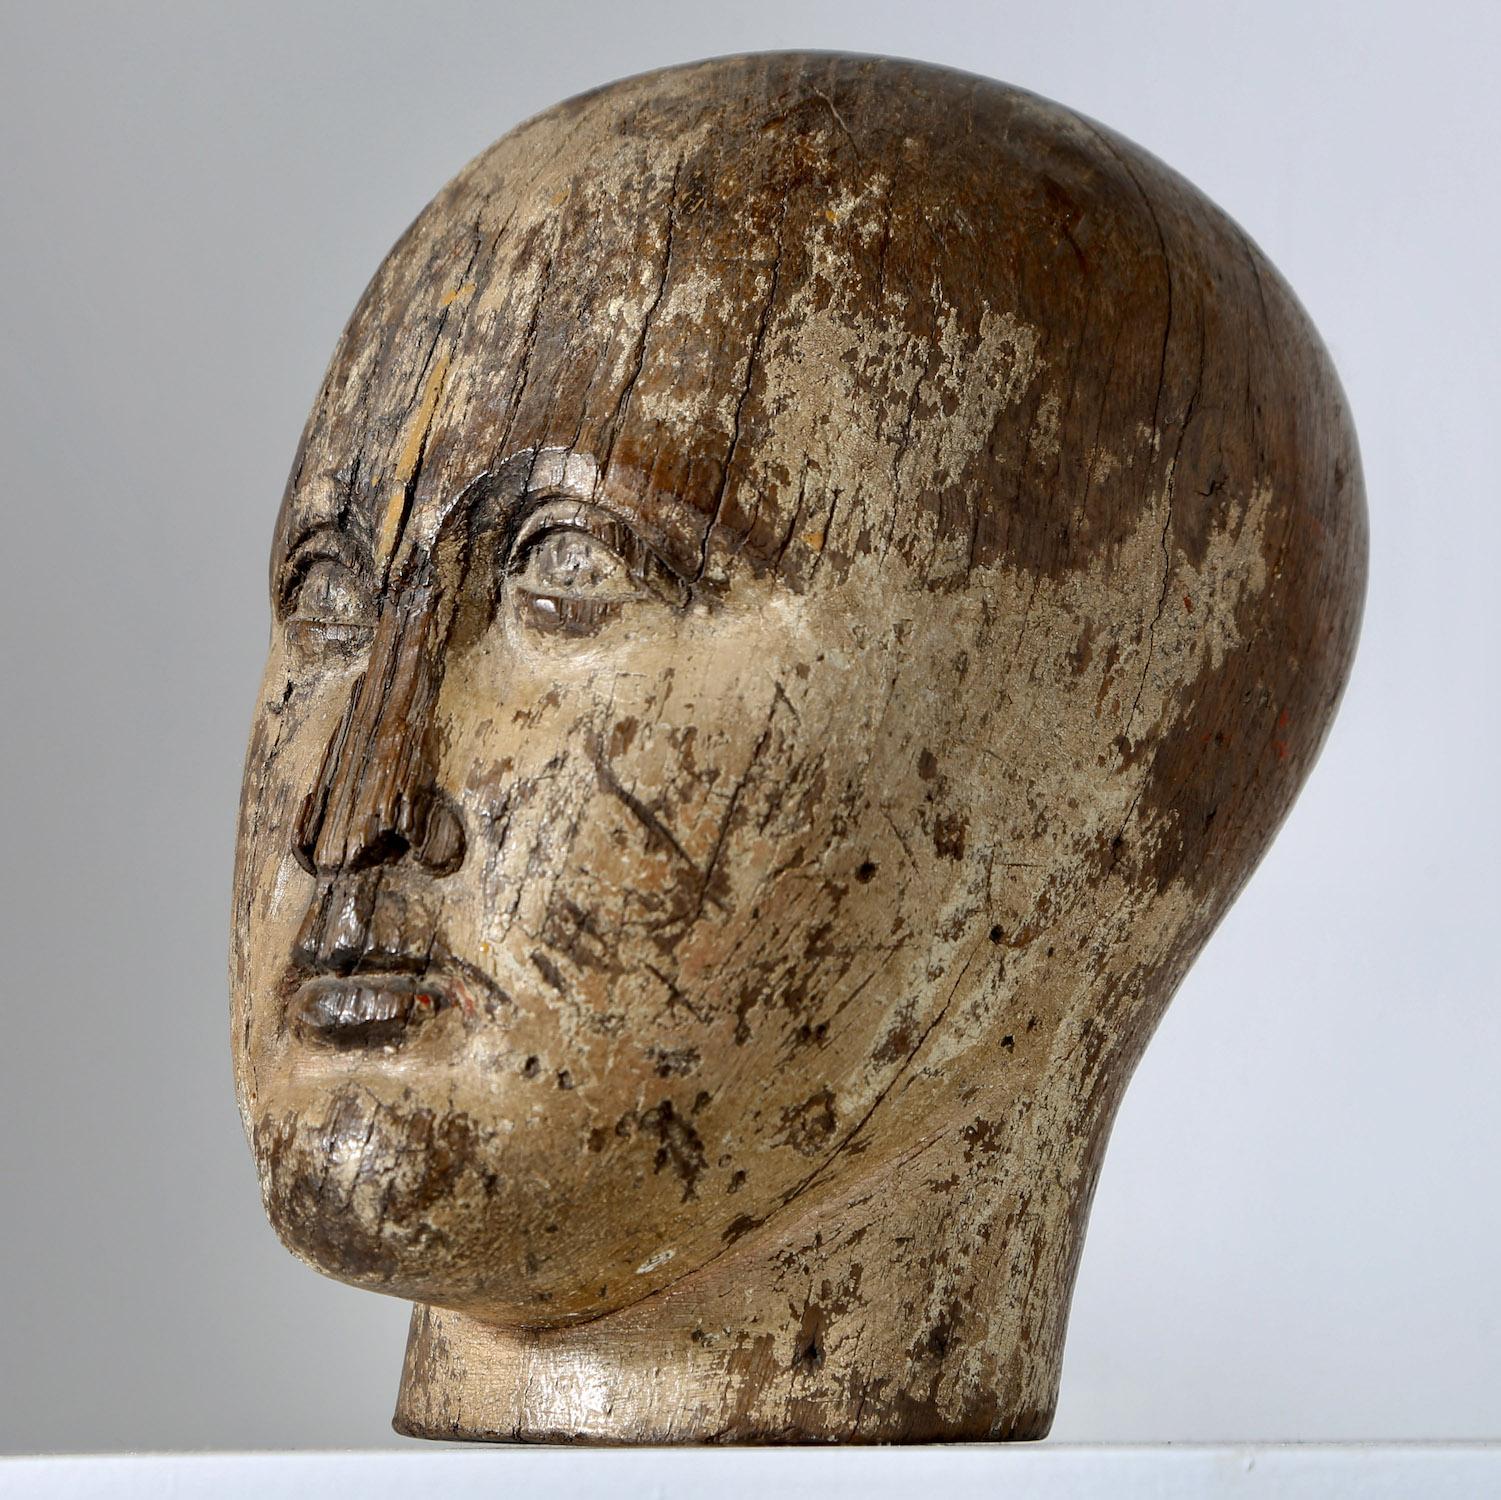 Vagabond antiques presents an 18th Century mannequin head

France, Circa 1780

” An exceptional 18th Century carved wooden head, a rare find as the heads were detachable from the mannequin bodies so often lost to time, this characterful head has